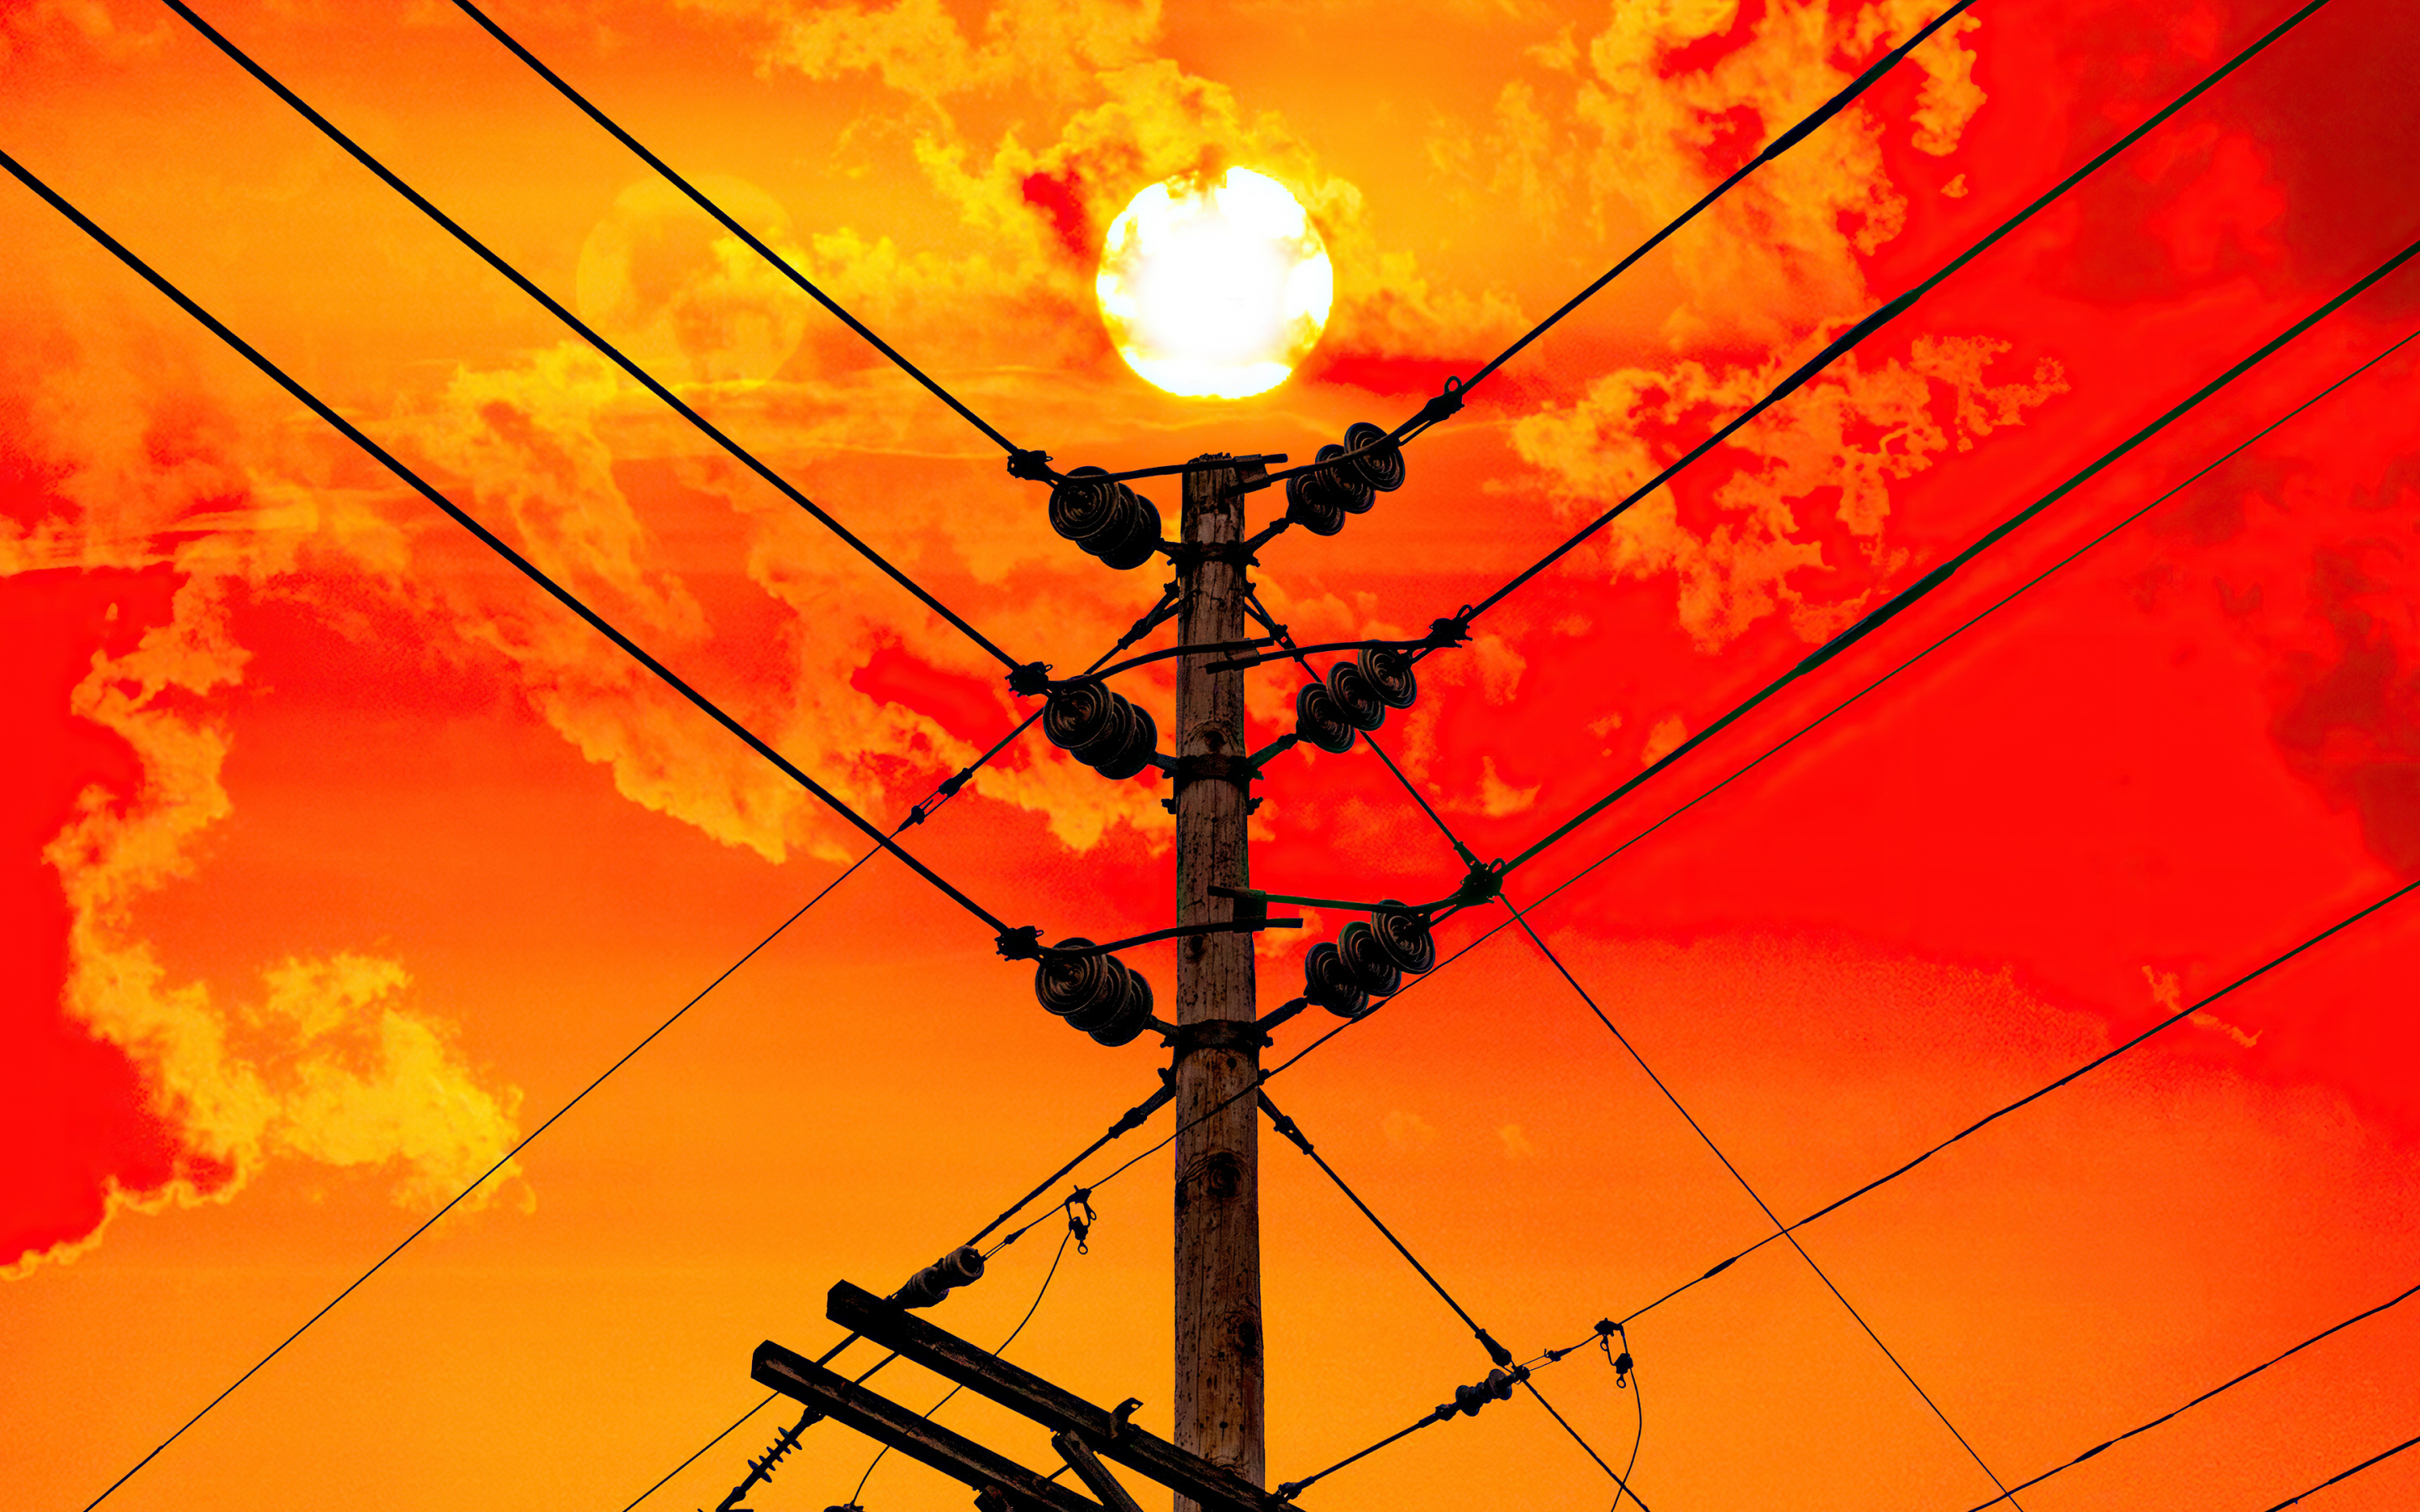 Electric wires, pole, sunset, 2880x1800 wallpaper